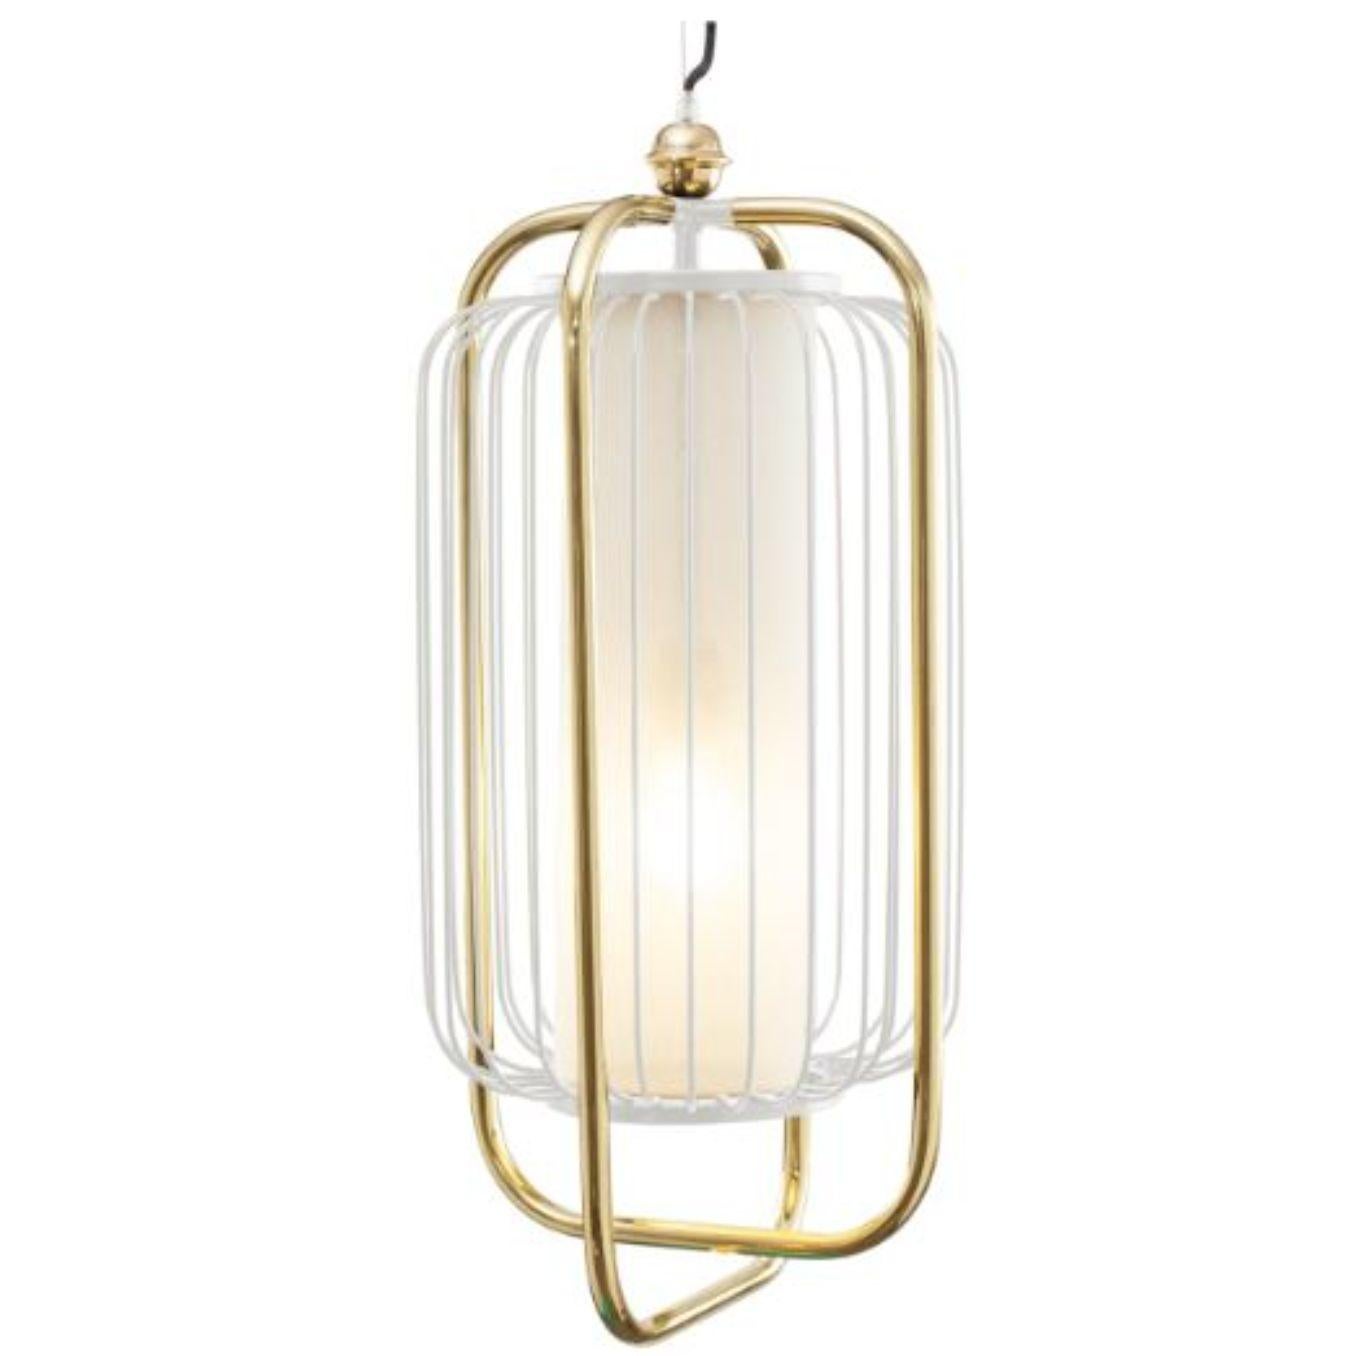 Brass and ivory Jules II suspension lamp by Dooq.
Dimensions: W 30 x D 30 x H 64 cm.
Materials: lacquered metal, polished or brushed metal, brass.
abat-jour: cotton.
Also available in different colours and materials.